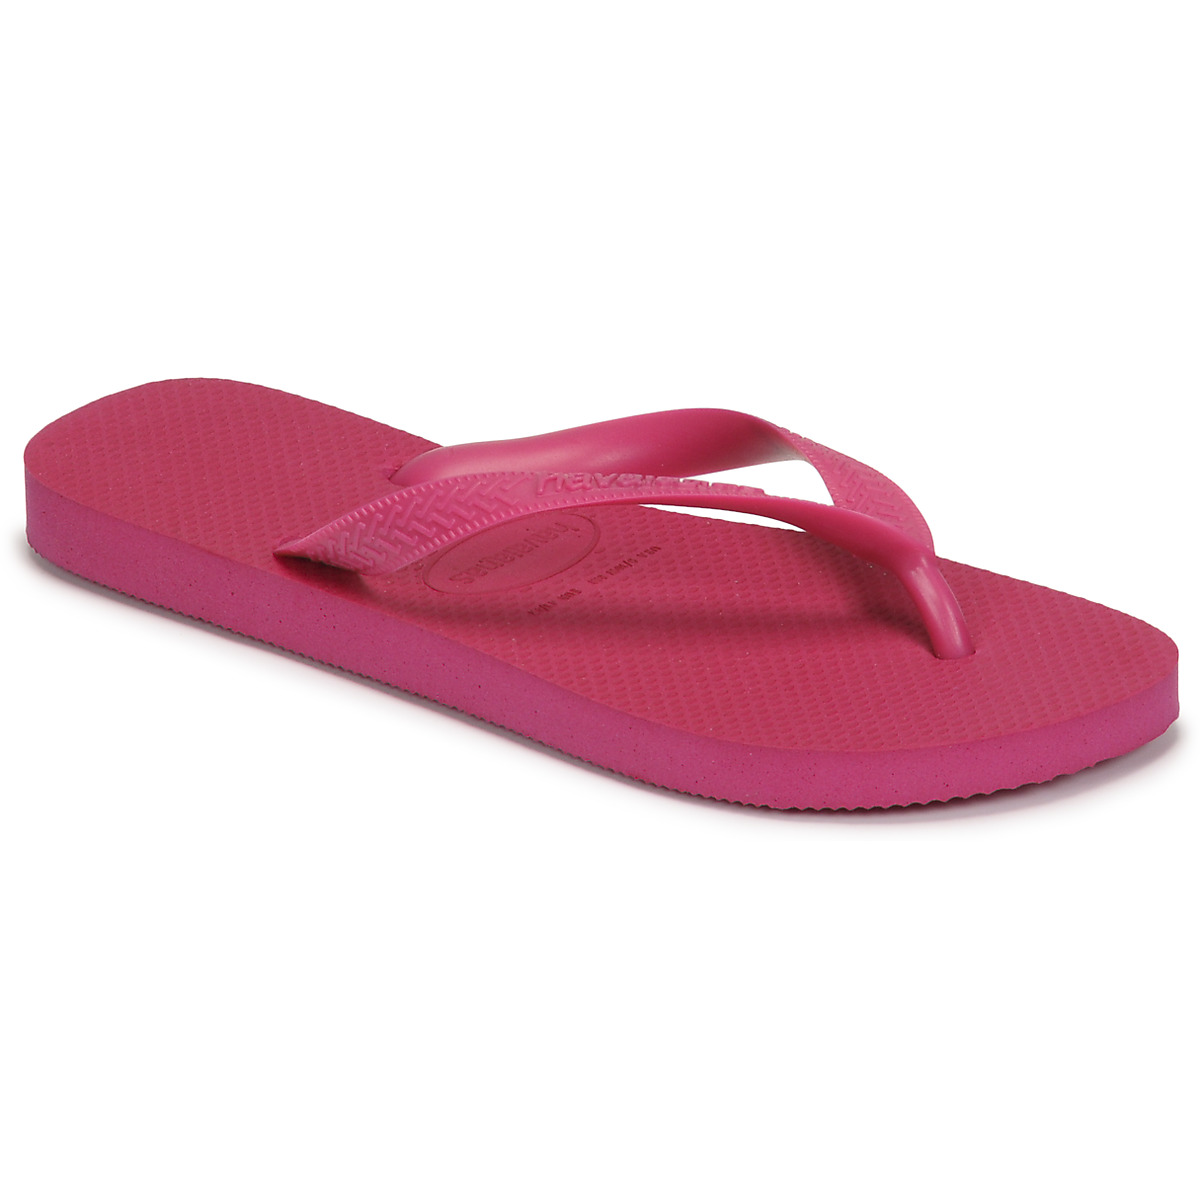 Chaussures Femme Tongs Havaianas TOP 